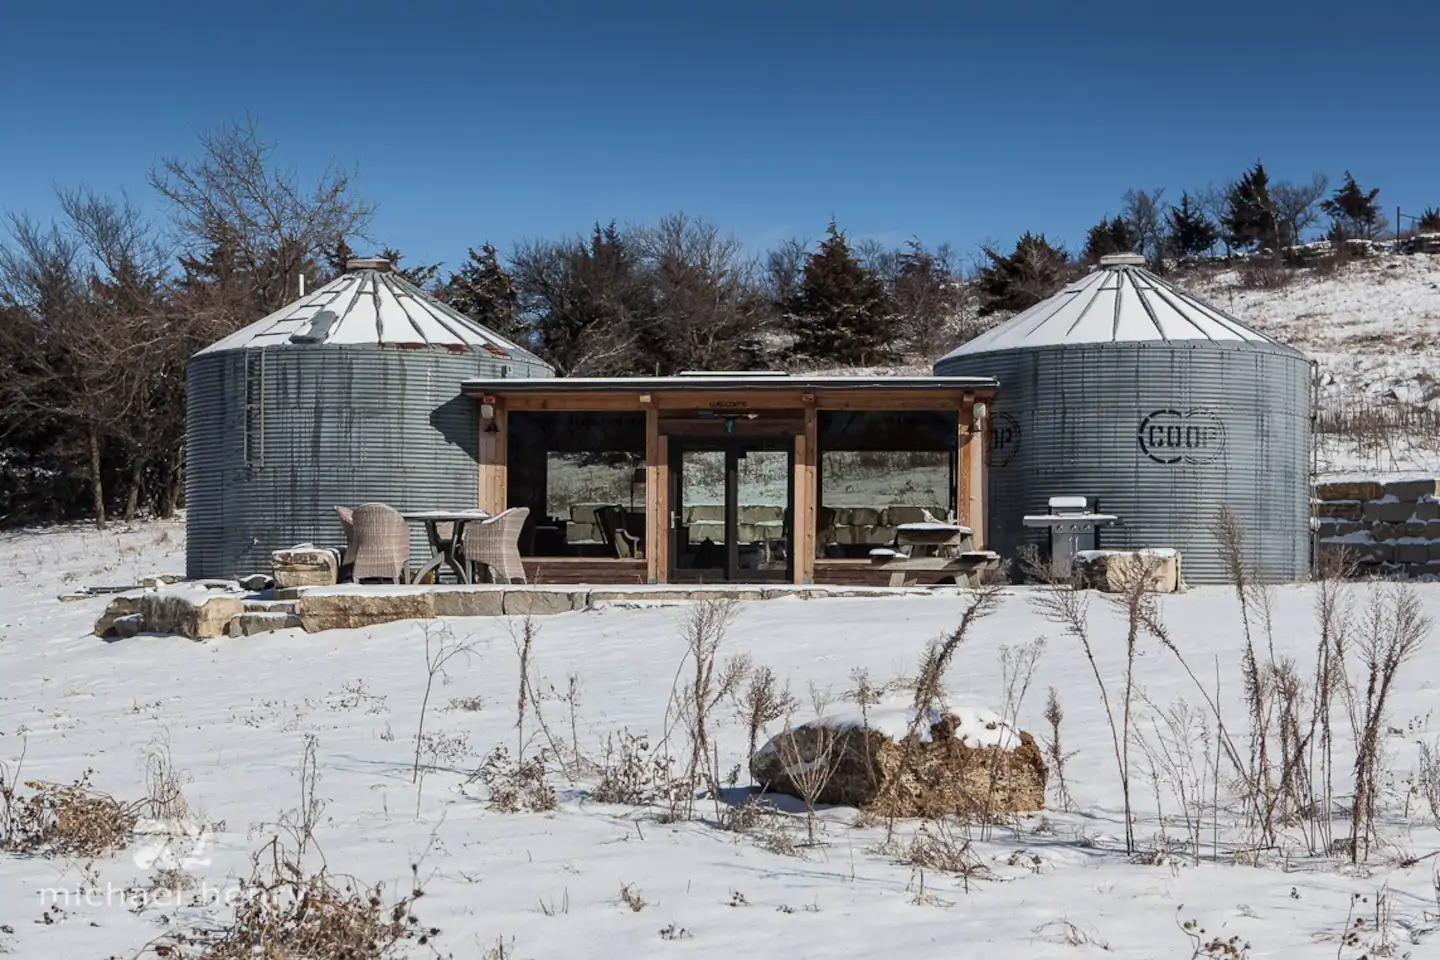 Konza Cabin is a really unique Airbnb in Kansas